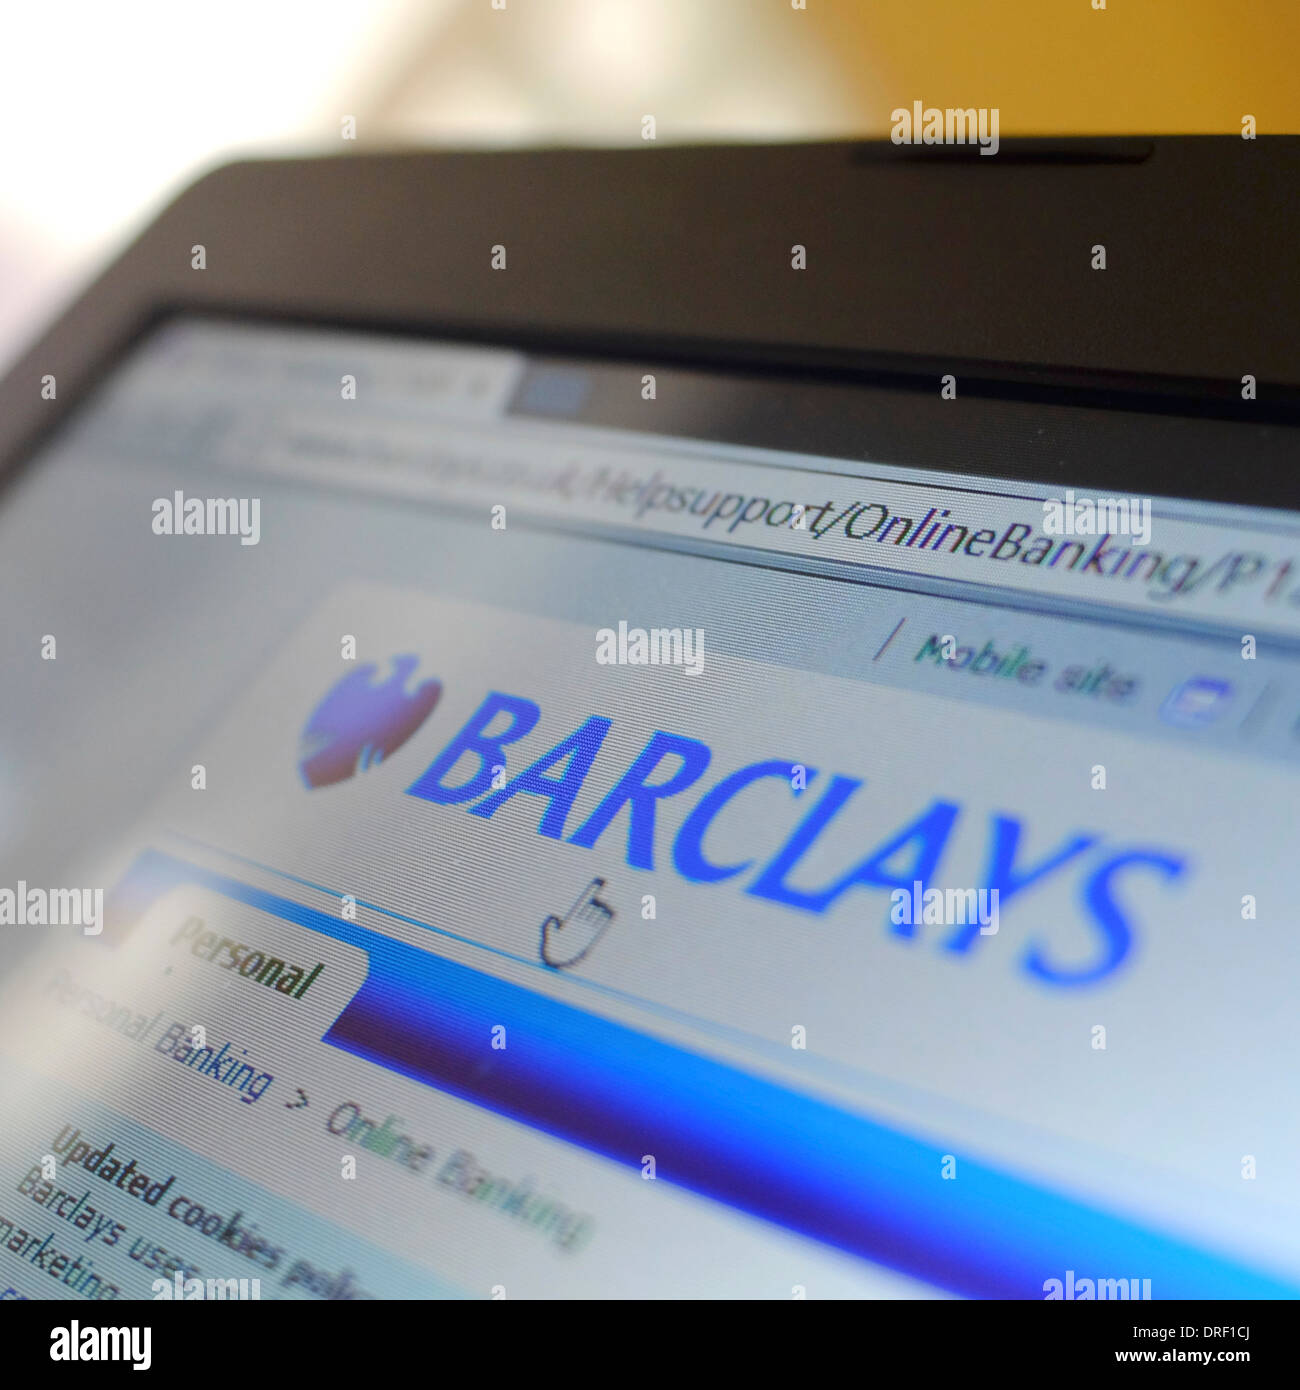 Barclays Internet banking on a laptop Stock Photo